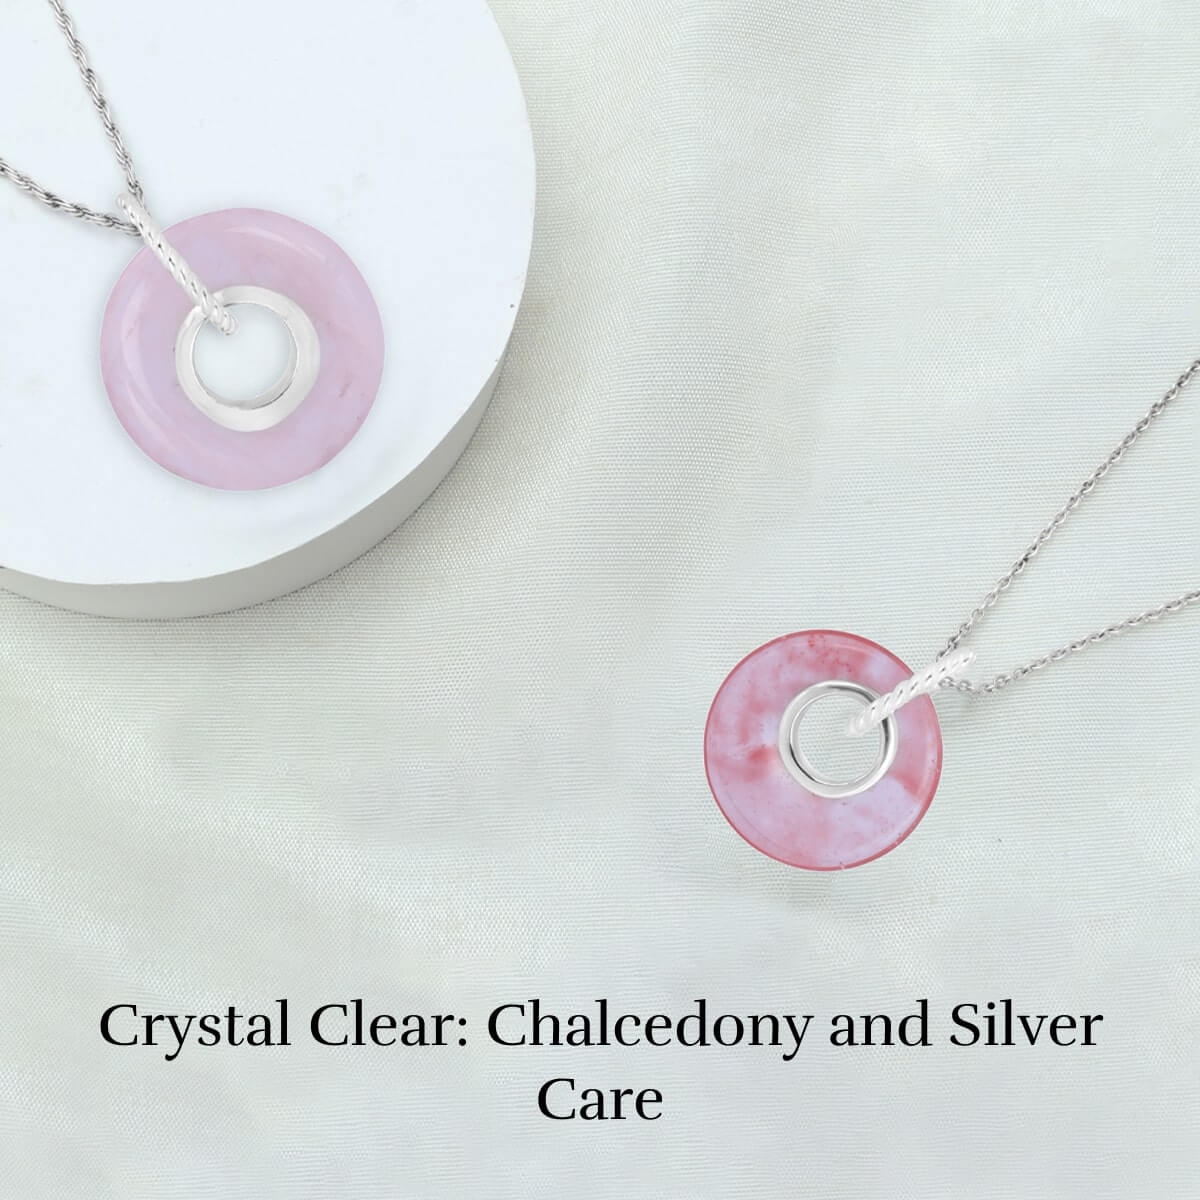 How to Clean Your Chalcedony Plain Silver Jewelry